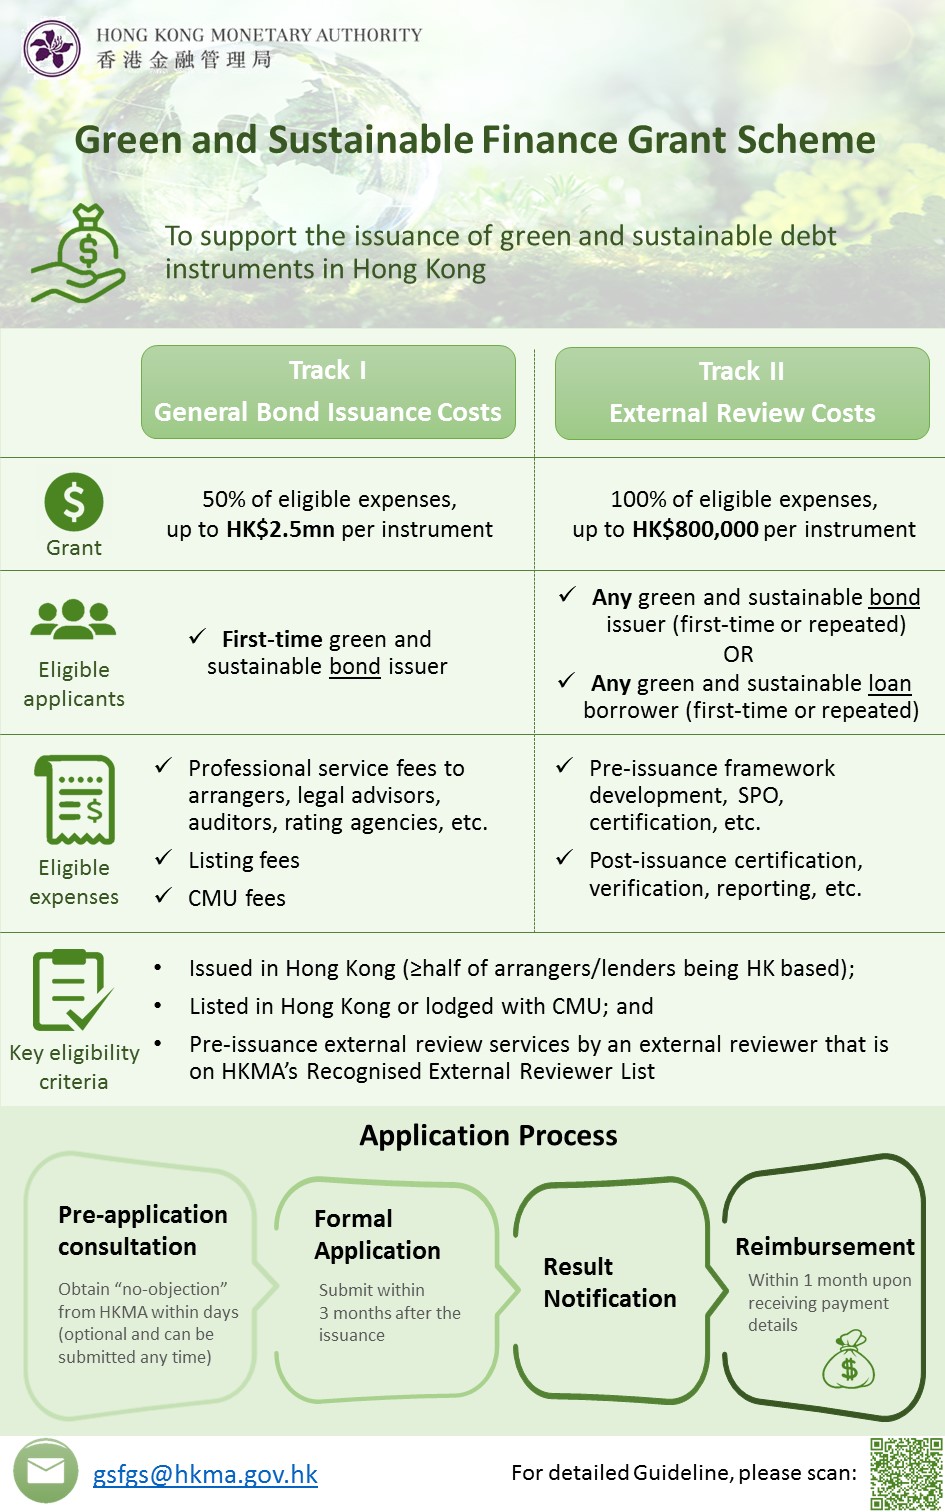 Green and Sustainable Finance Grant Scheme (click to enlarge)